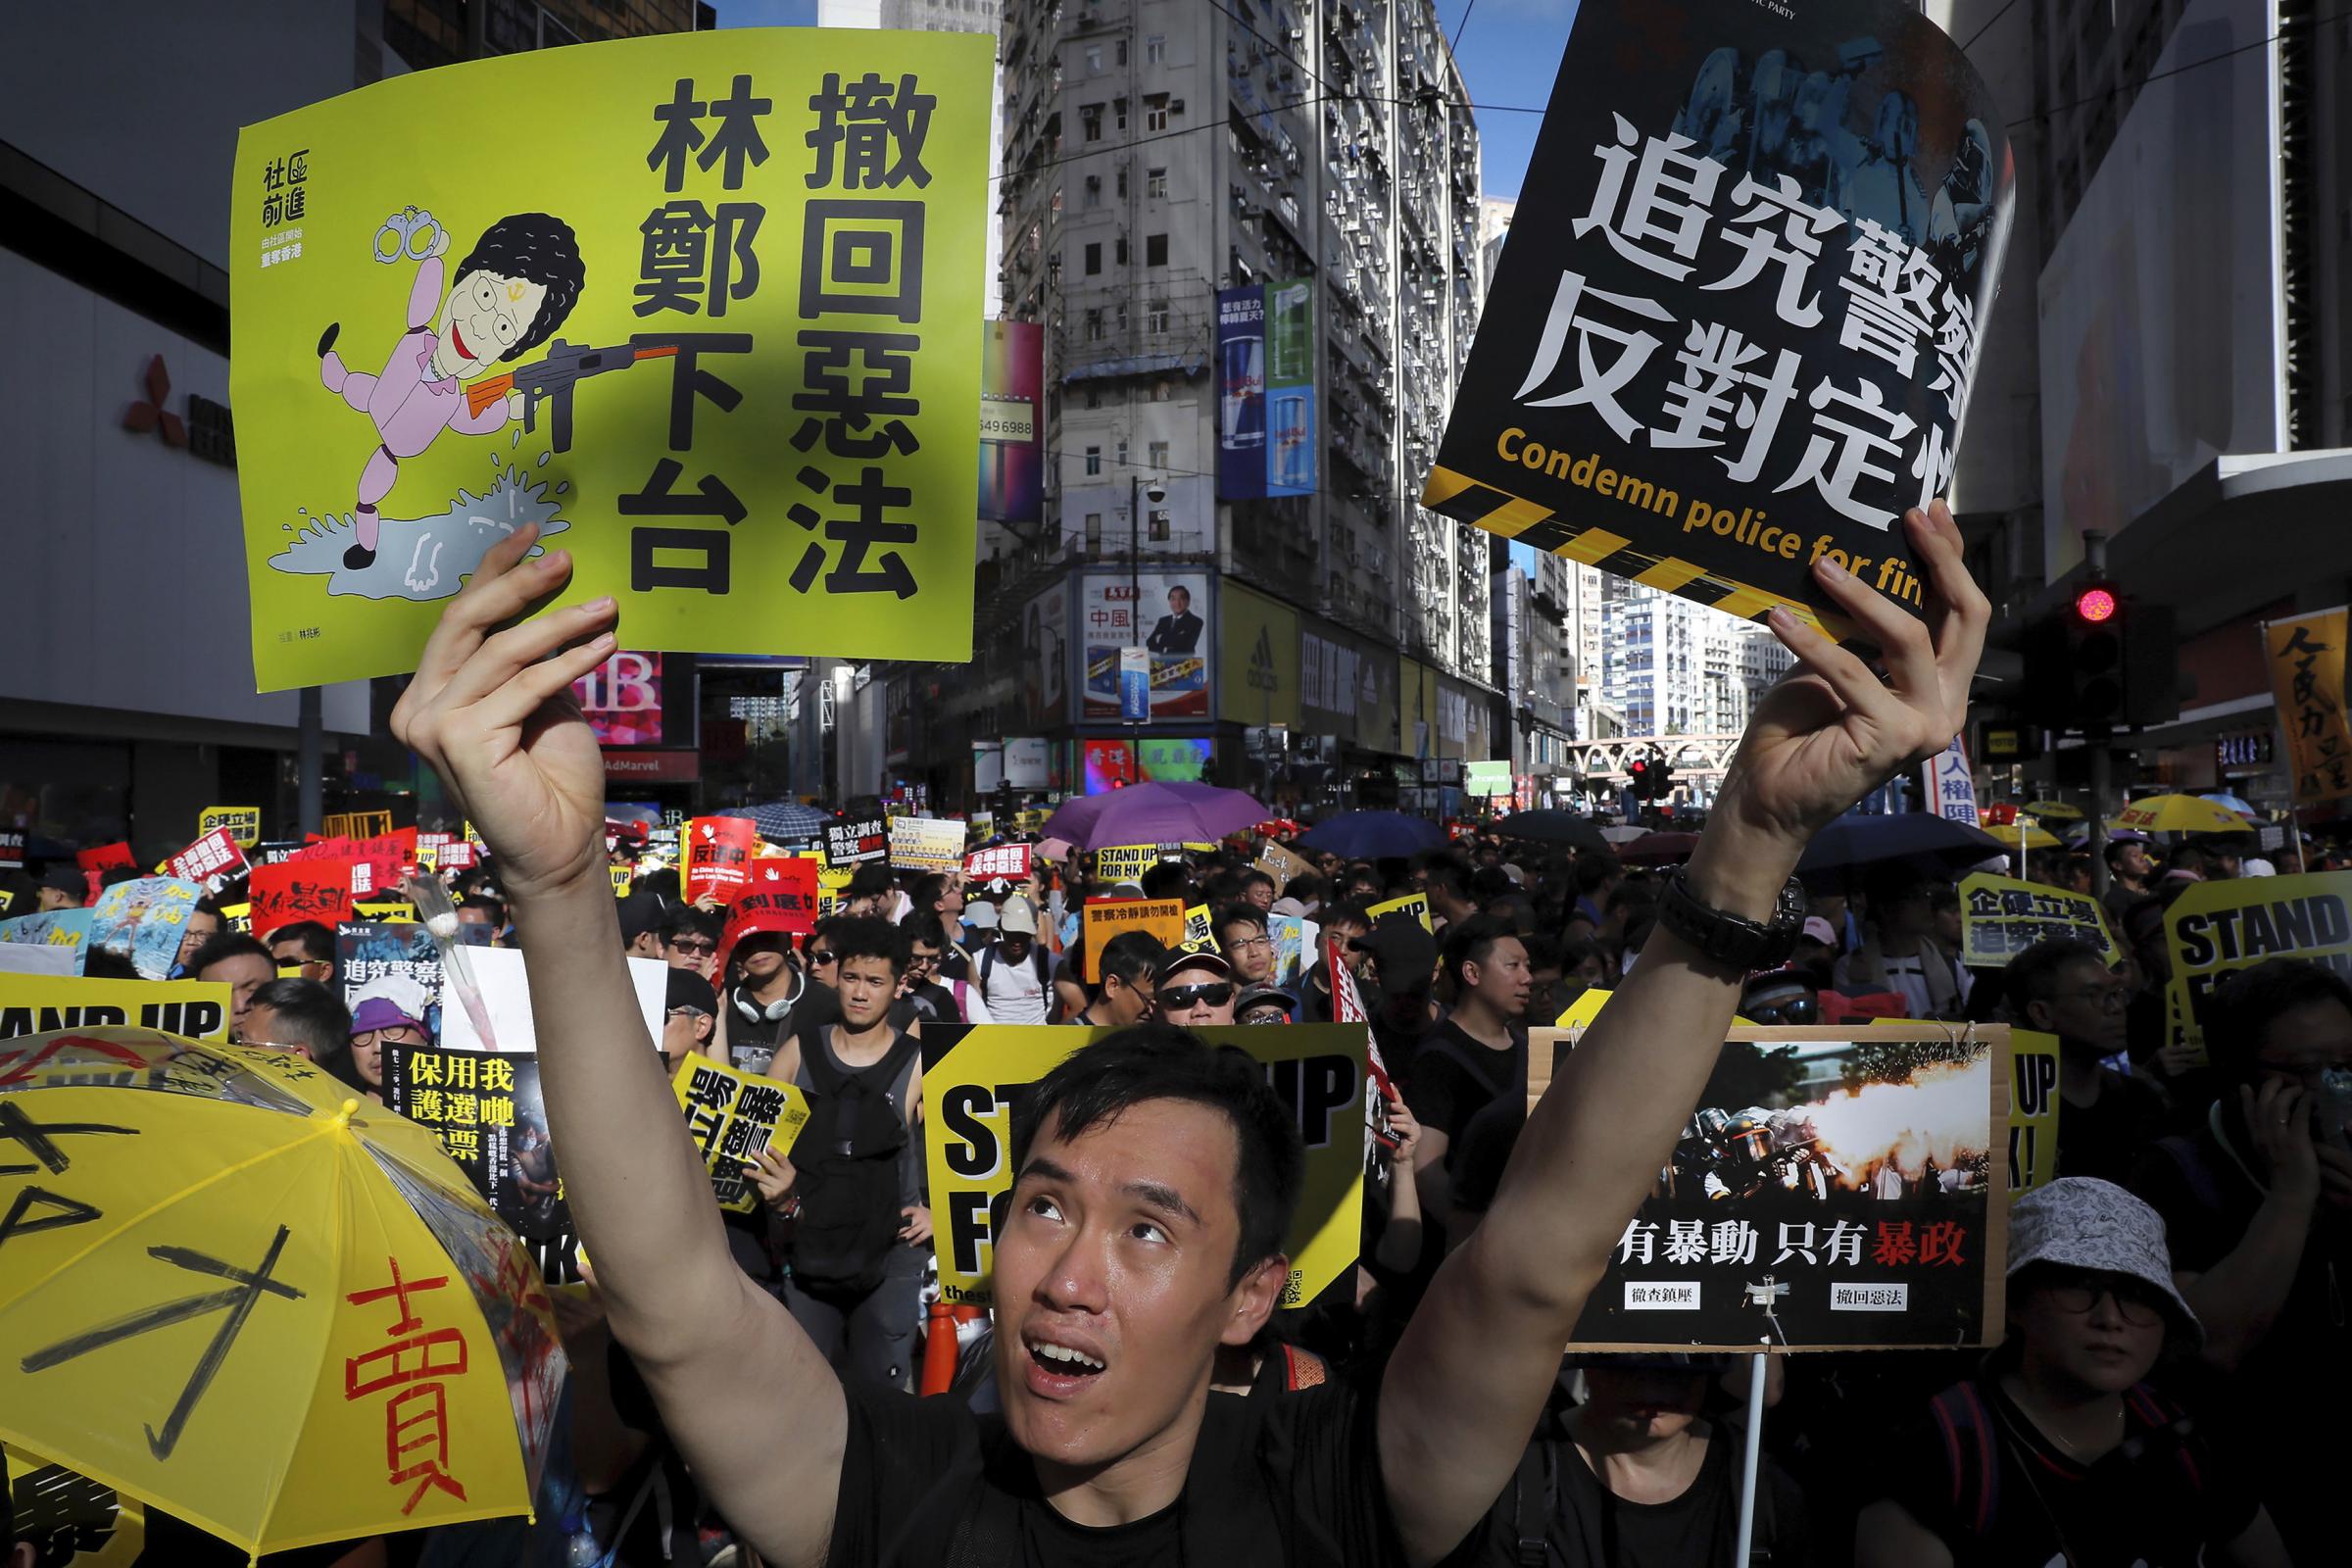 LETTER: We should learn from the people of Hong Kong